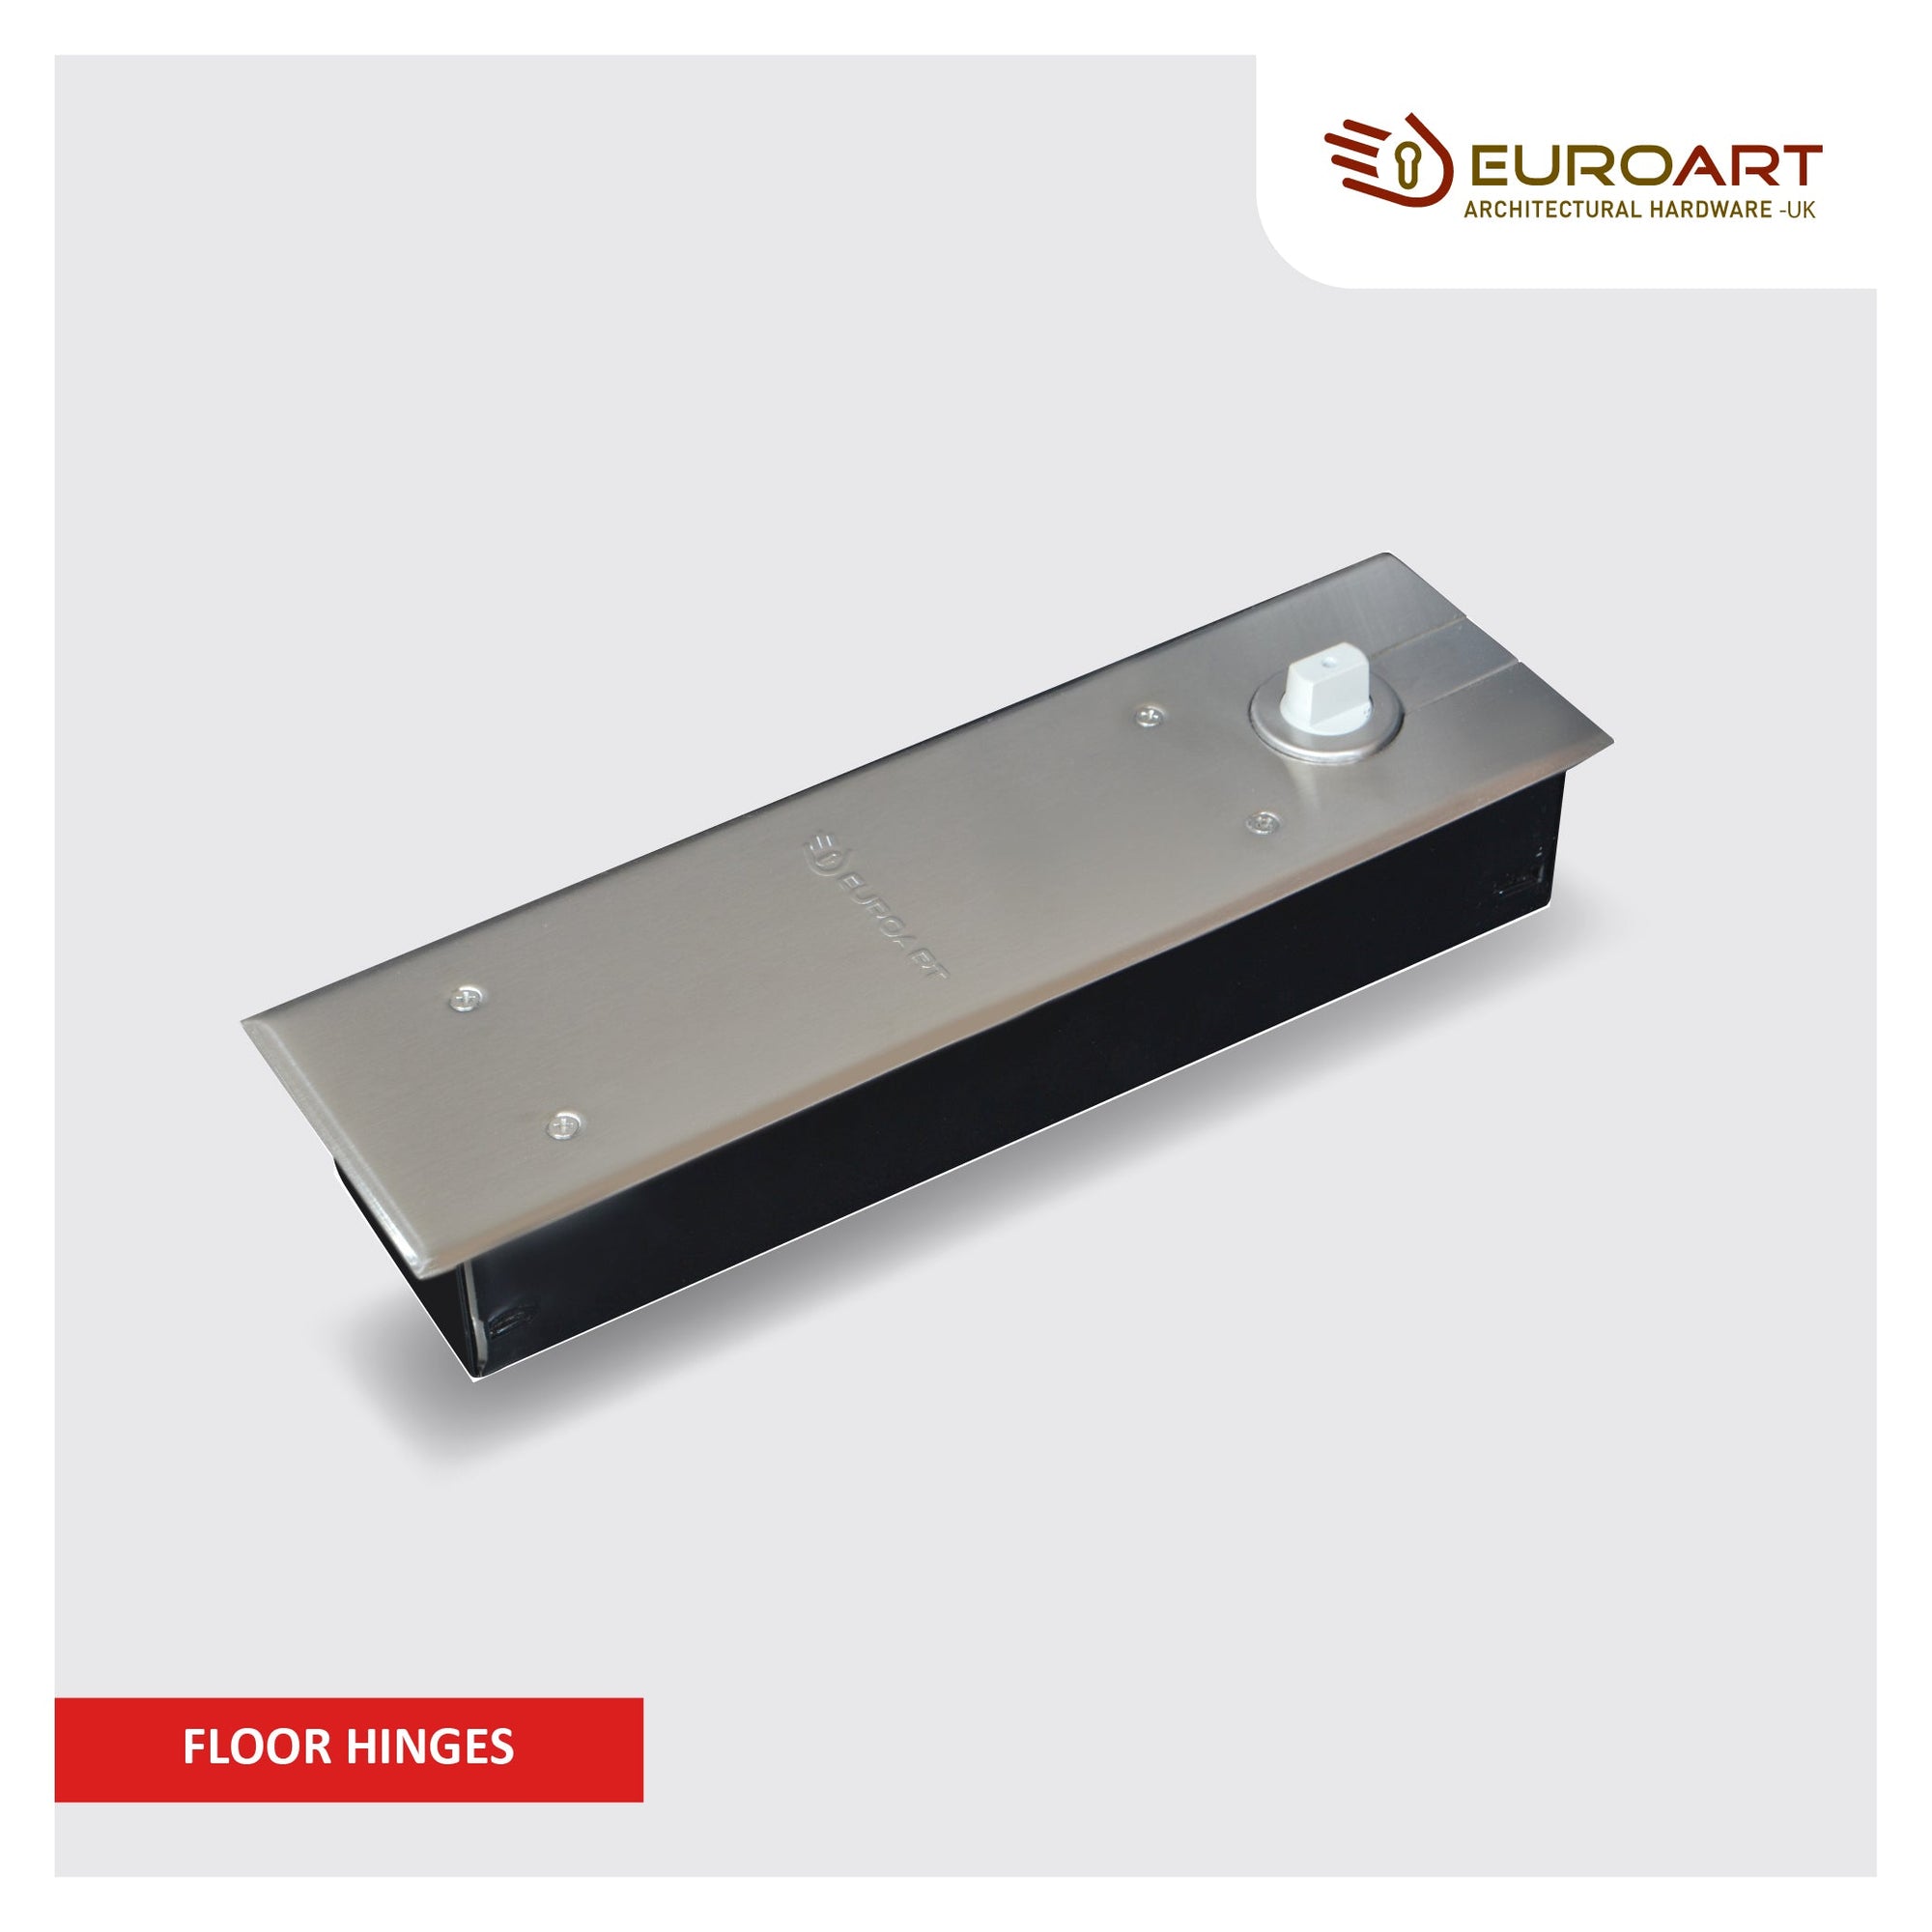 Seamless and durable EuroArt Floor Hinges by M. M. Noorbhoy & Co - High-quality hinges for smooth door functionality.